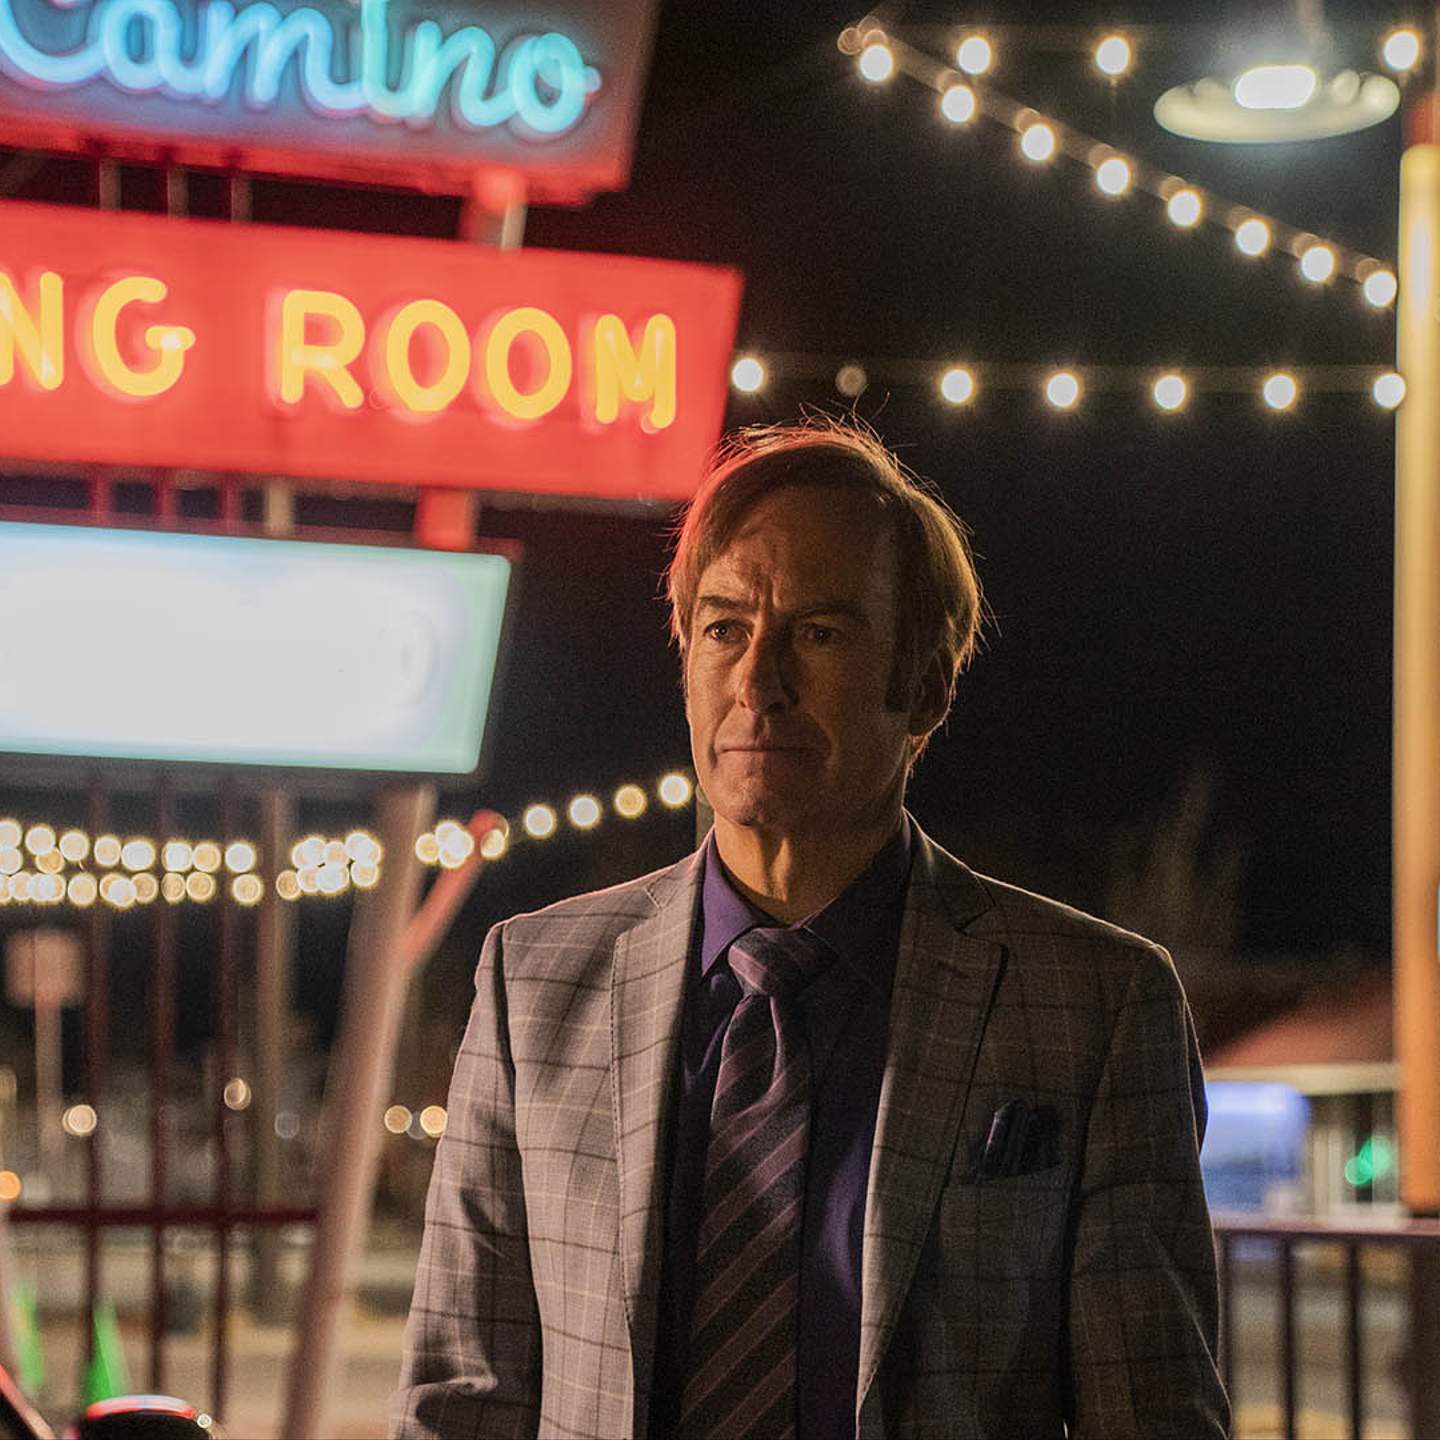 Critics Laud The 'Masterful' Conclusion Of Better Call Saul